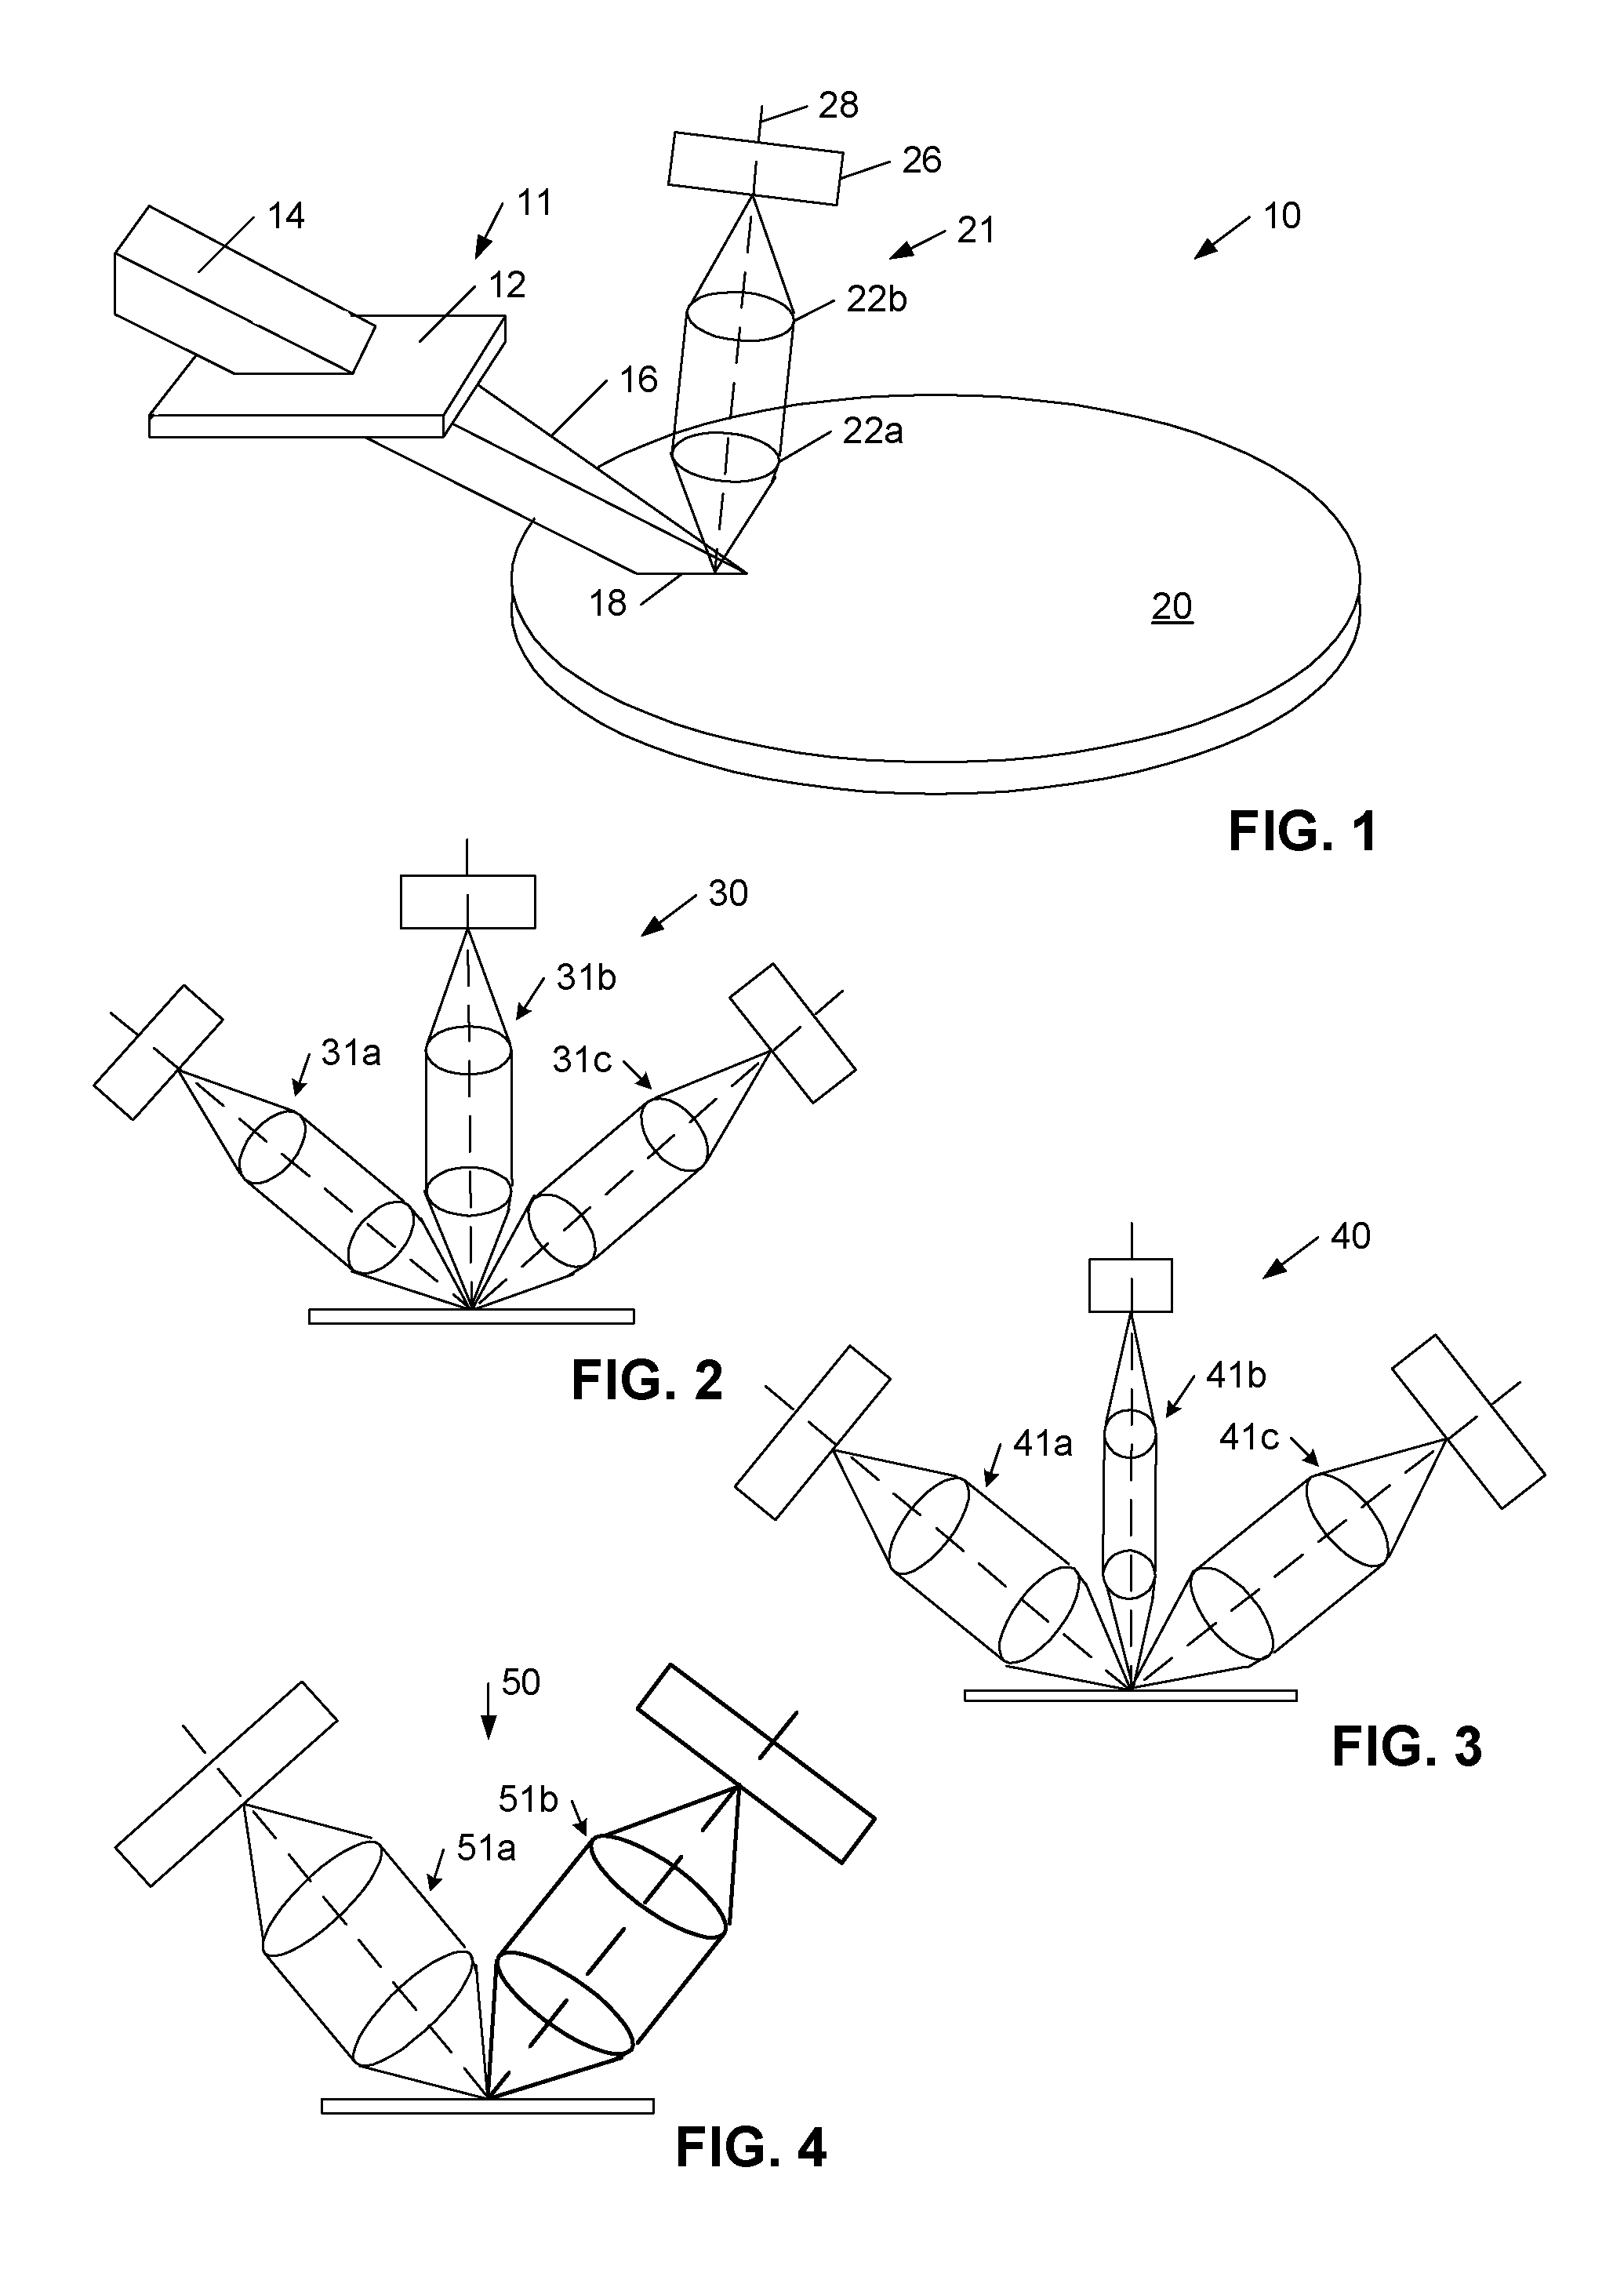 Surface inspection system using laser line illumination with two dimensional imaging